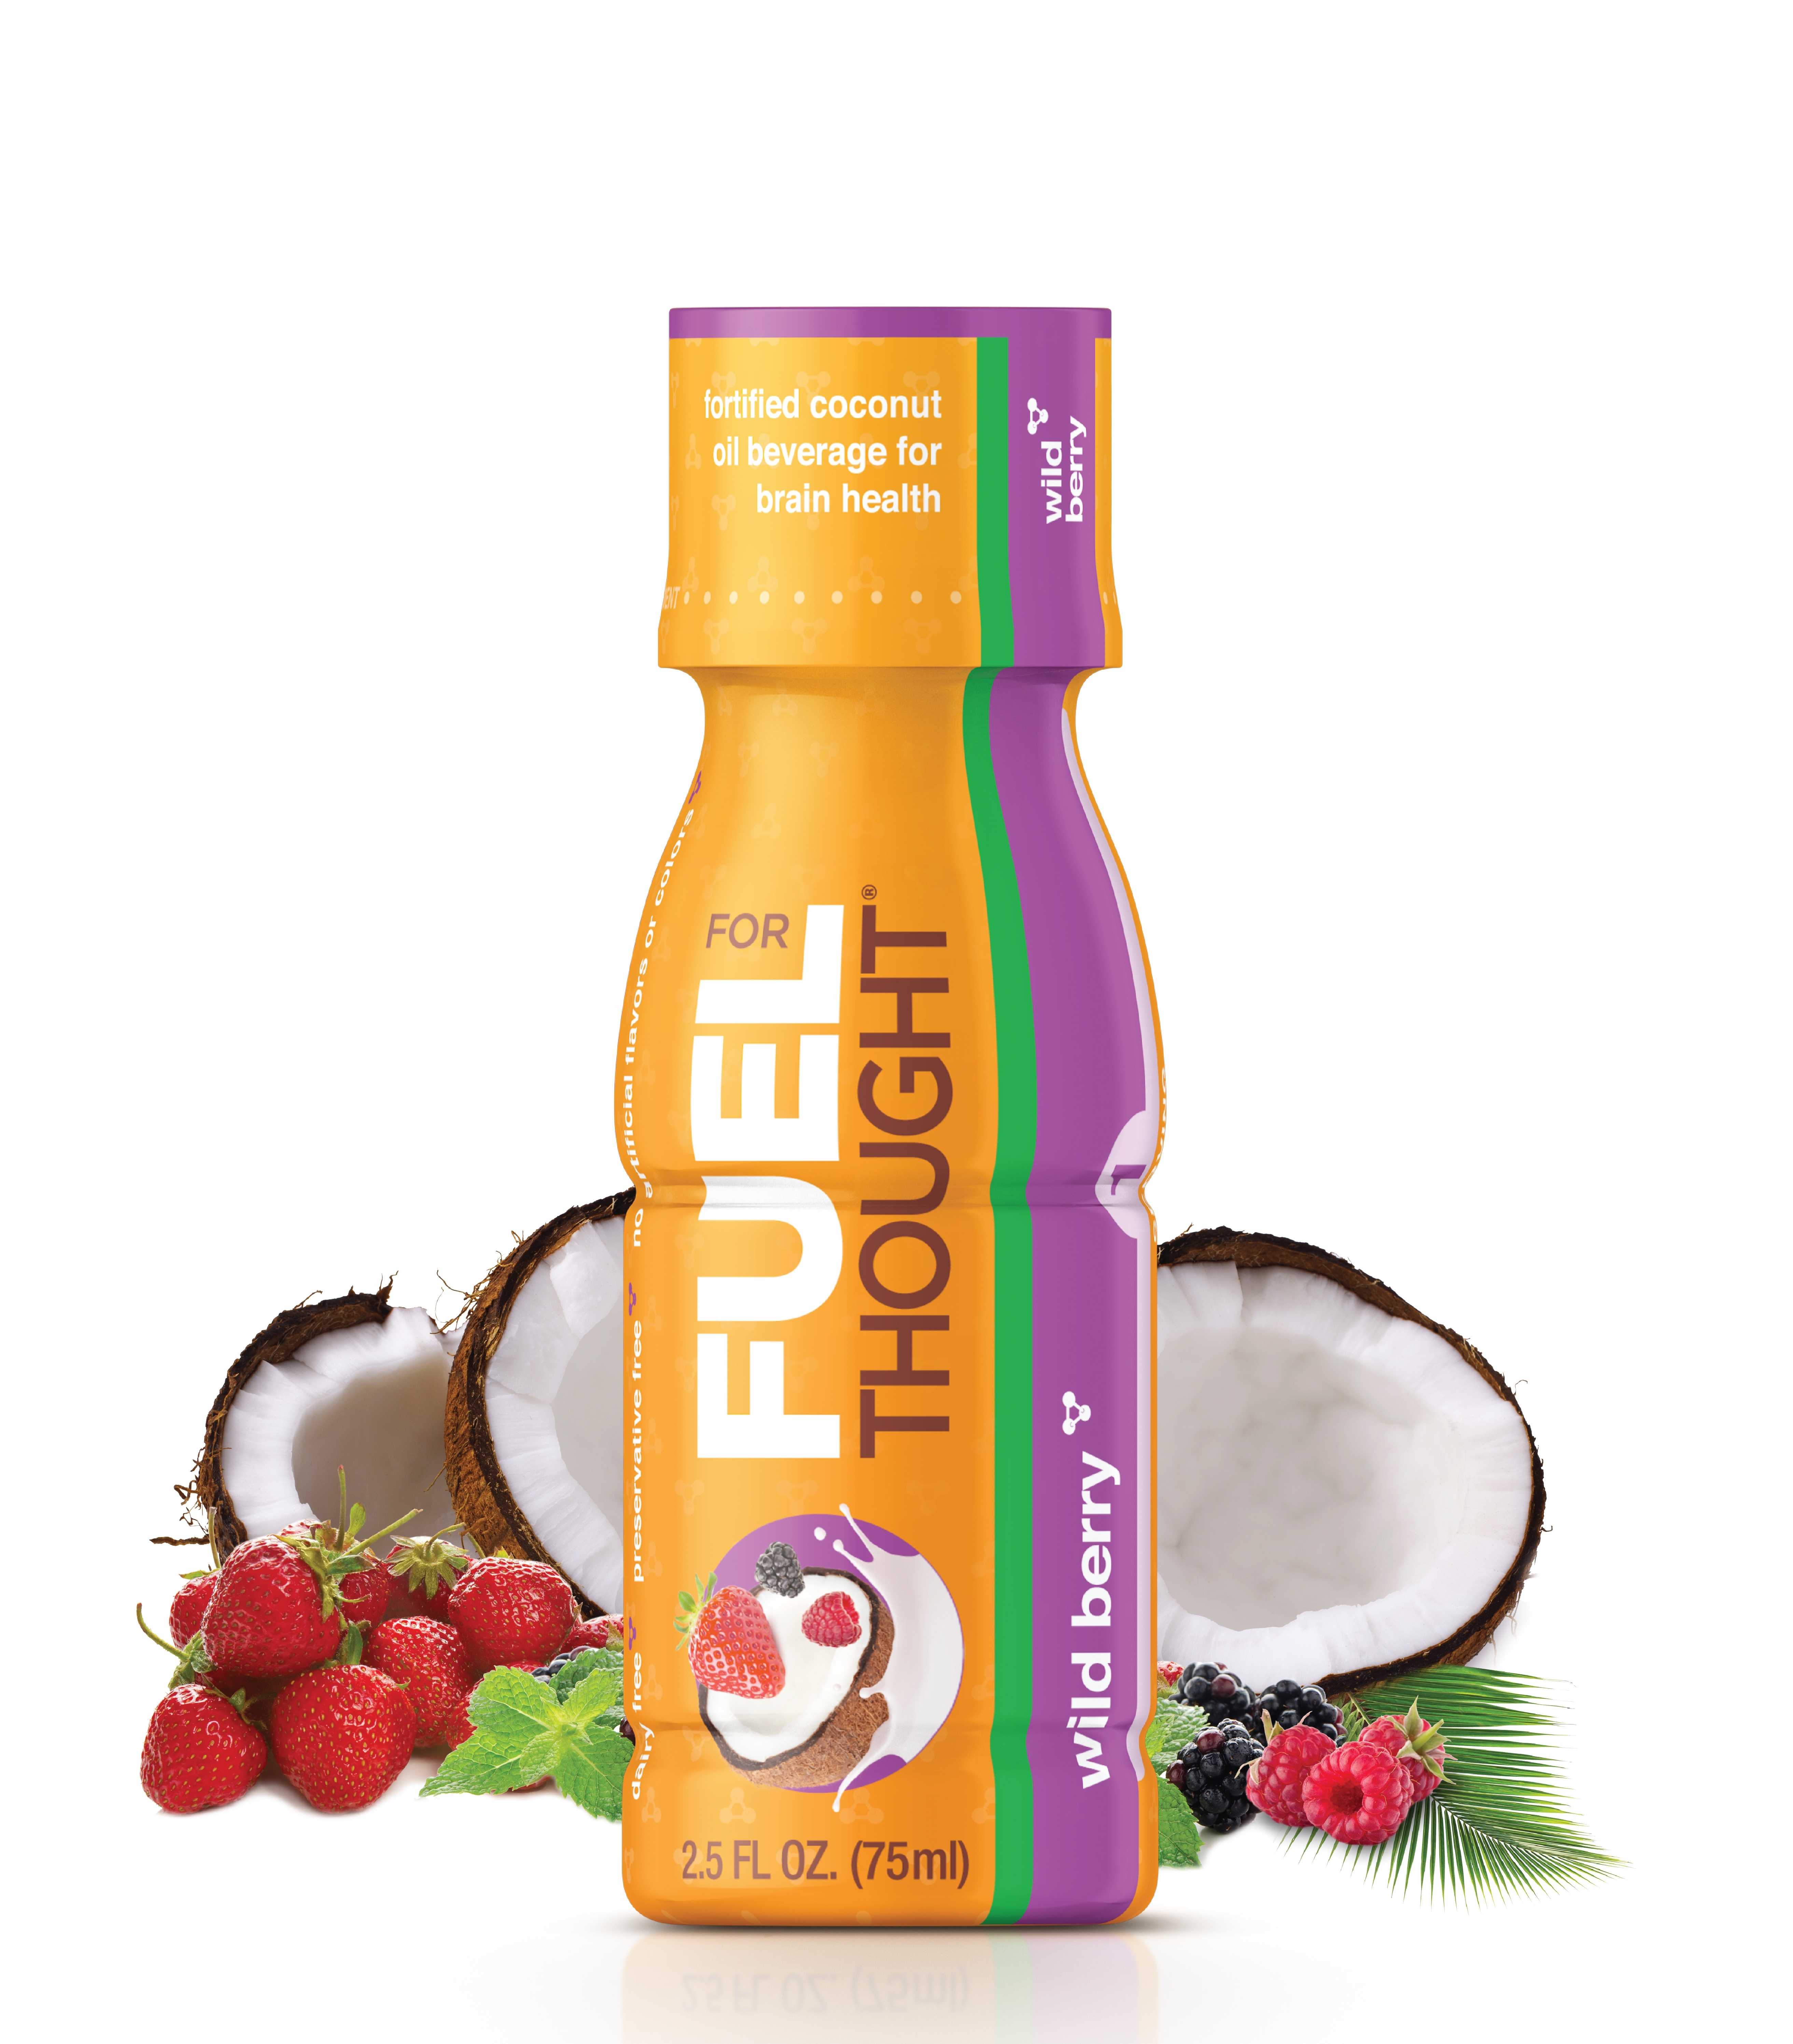 fuel-for-thought-fortified-coconut-oil-beverage-provides-potent-all